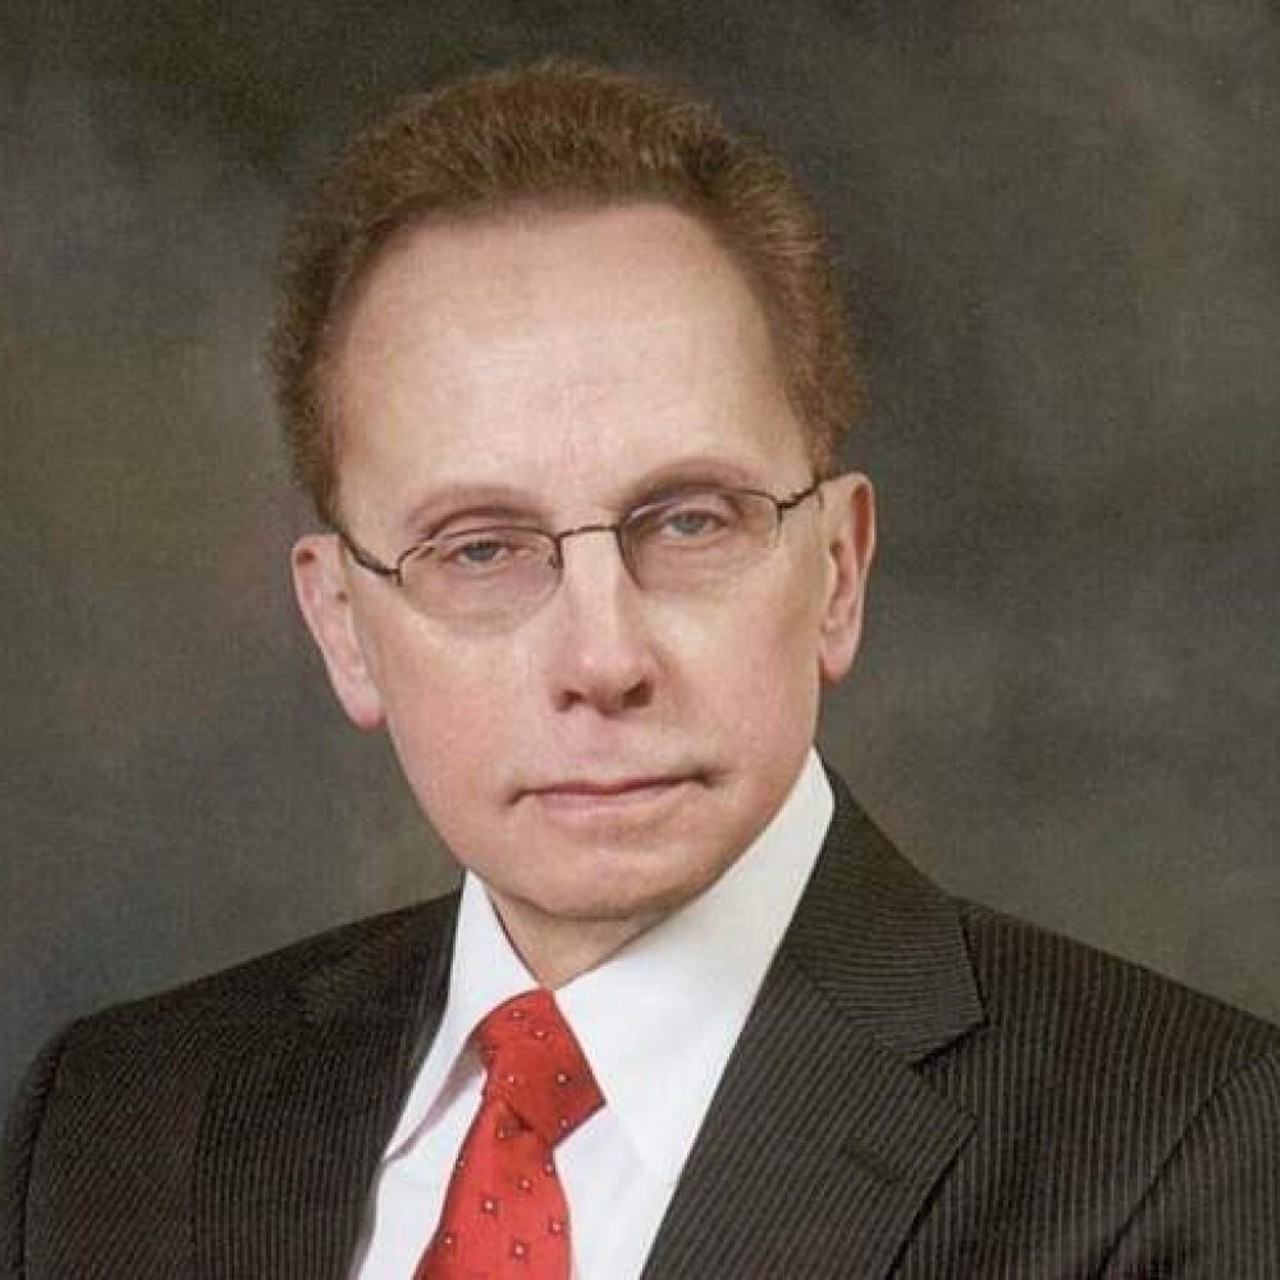 Fouts flouts the laws of morality &#151; Longtime Warren Mayor Jim Fouts &#151; he who is allegedly on tape surfaced by Motor City Muckraker disparaging women, and mocking black people and children with disabilities &#151; spent the first part of 2017 denying that he&#146;s a racist, sexist, handicap child-hating monster. The voice on the recording is not his, Fouts claims. That scandal dies down a little (but not before a Detroit minister shows up at a Warren City Council to call Fouts a &#147;coward&#148; for keeping a low profile) until a new one arises this month when it is alleged that he used his position to help a 31-year-old woman he appears to be dating get lifetime job protection through the city&#146;s civil service system. Fouts survived a recall effort in 2017. What will 2018 bring? 
Courtesy photo.